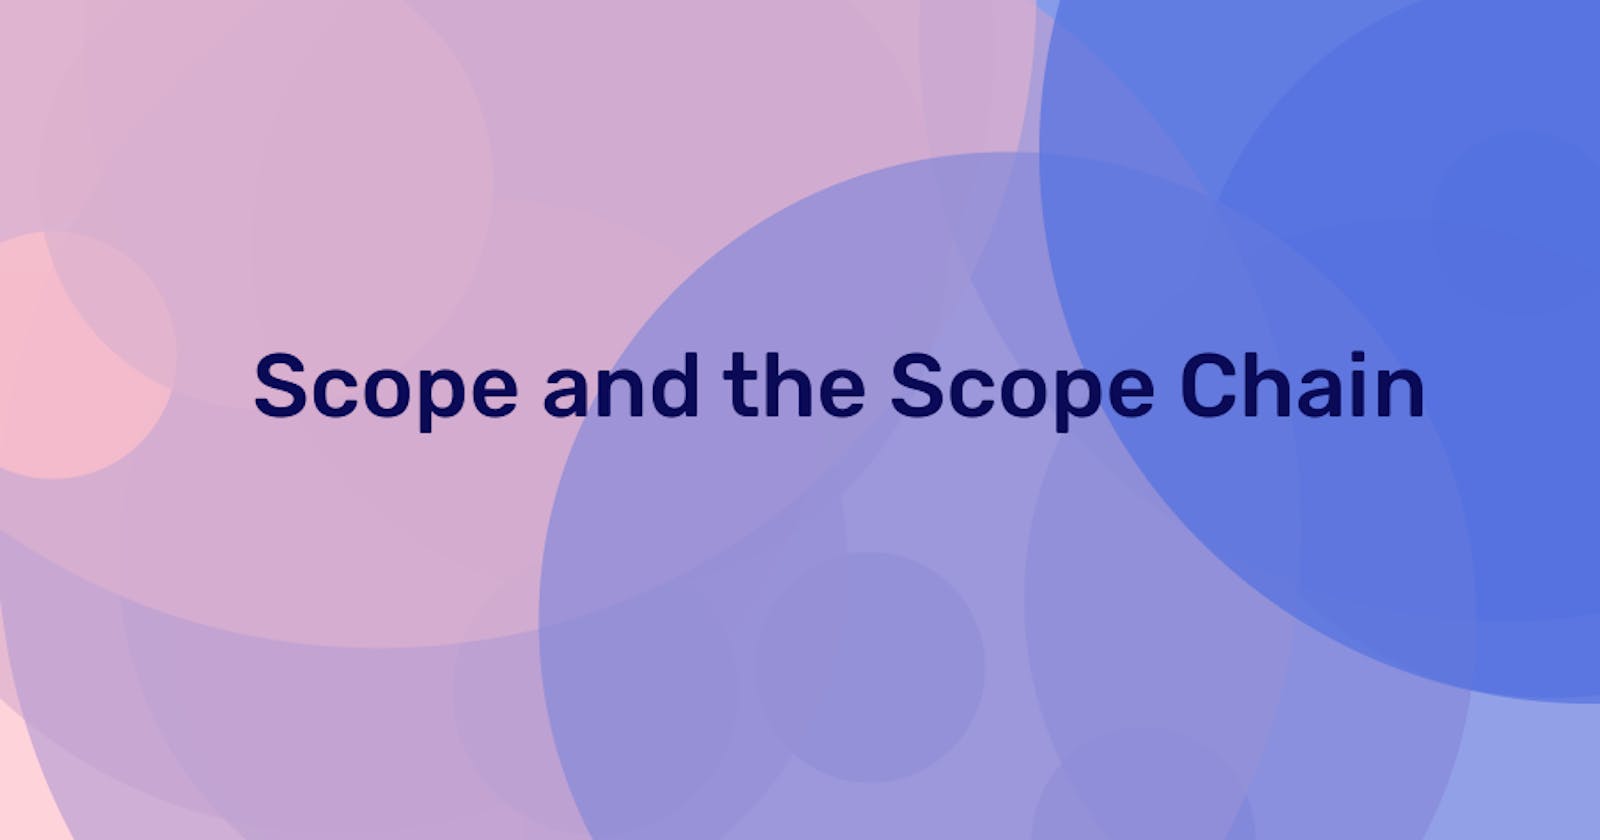 Scope and the Scope Chain